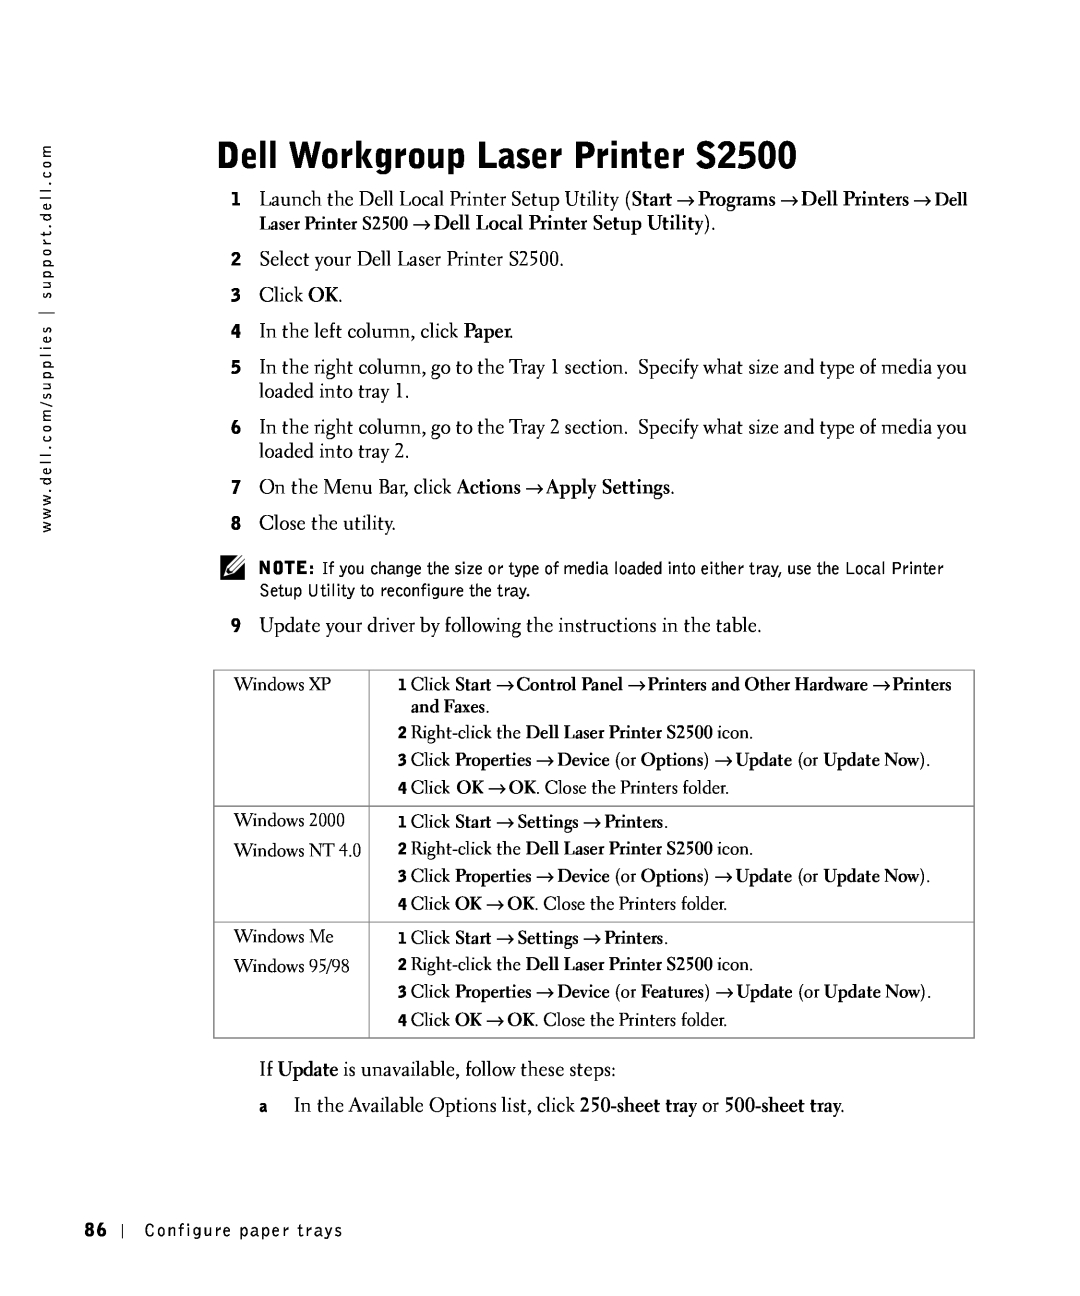 Dell owner manual Dell Workgroup Laser Printer S2500 